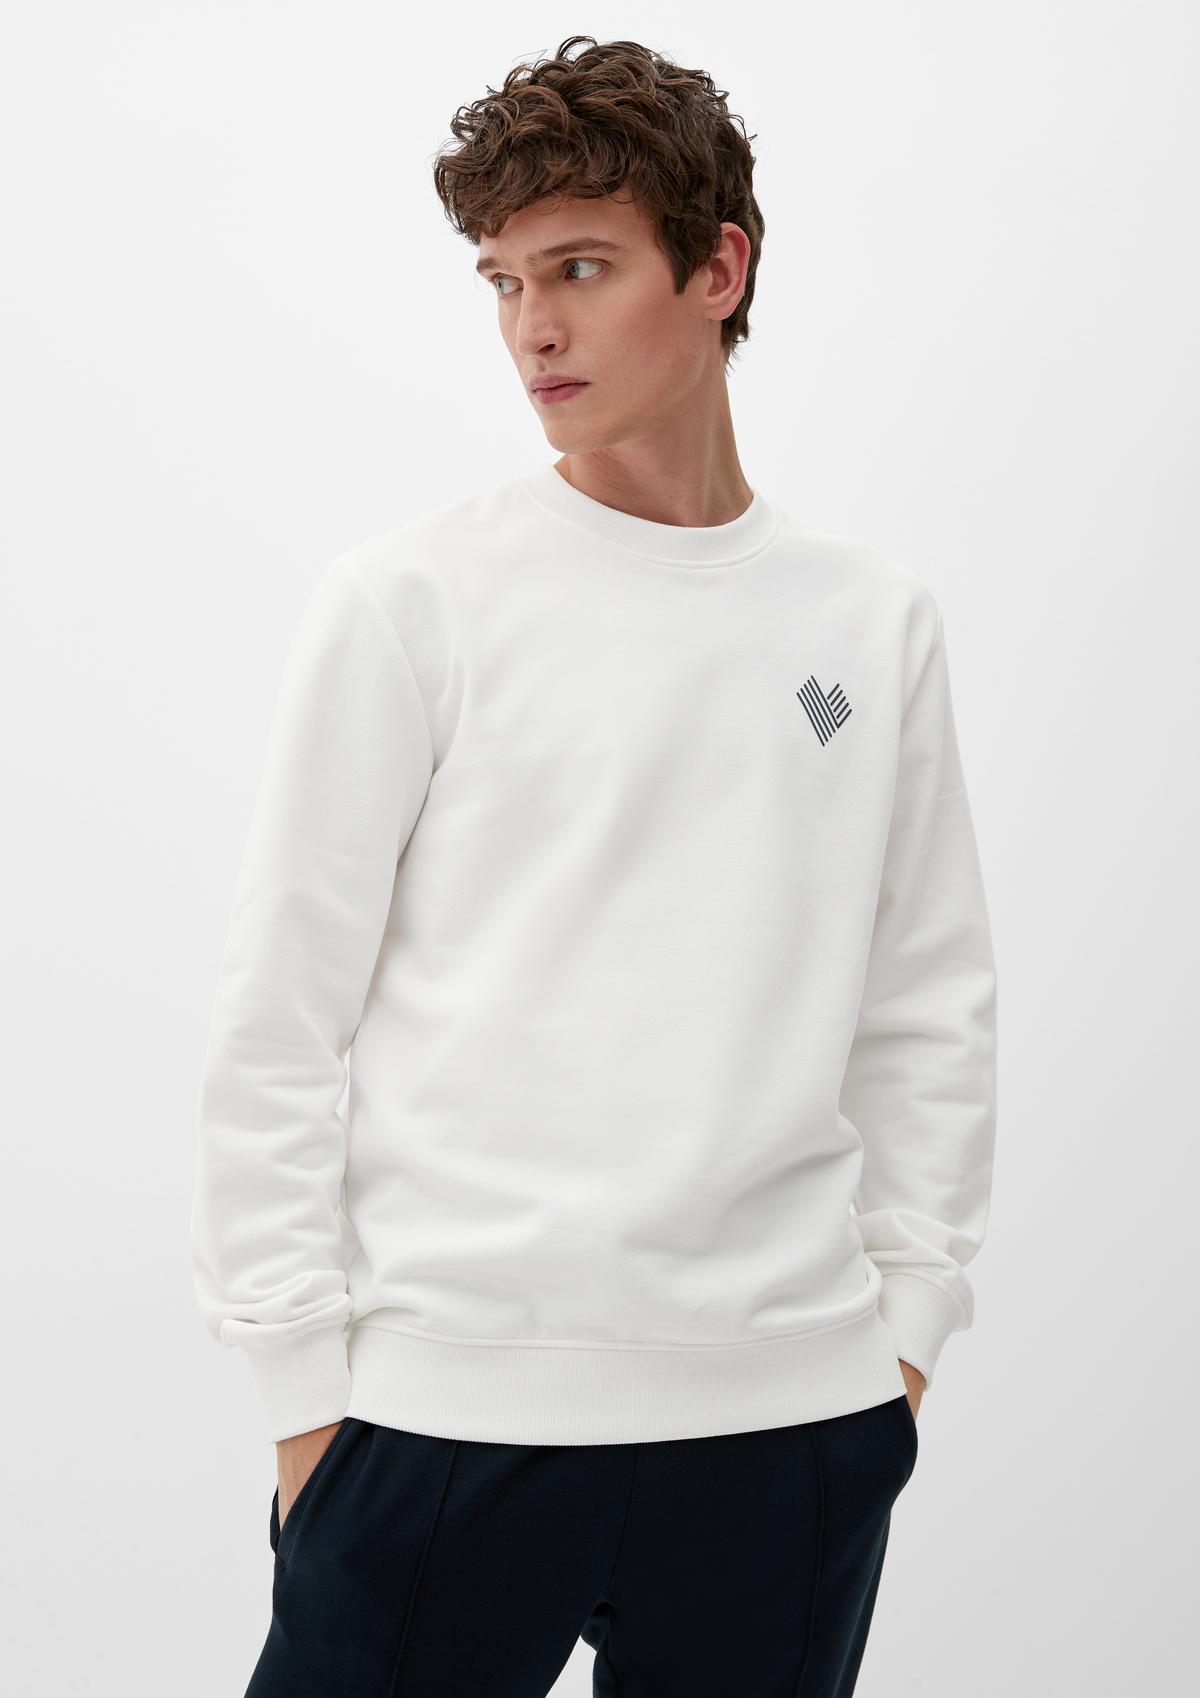 Sweatshirt with a front print